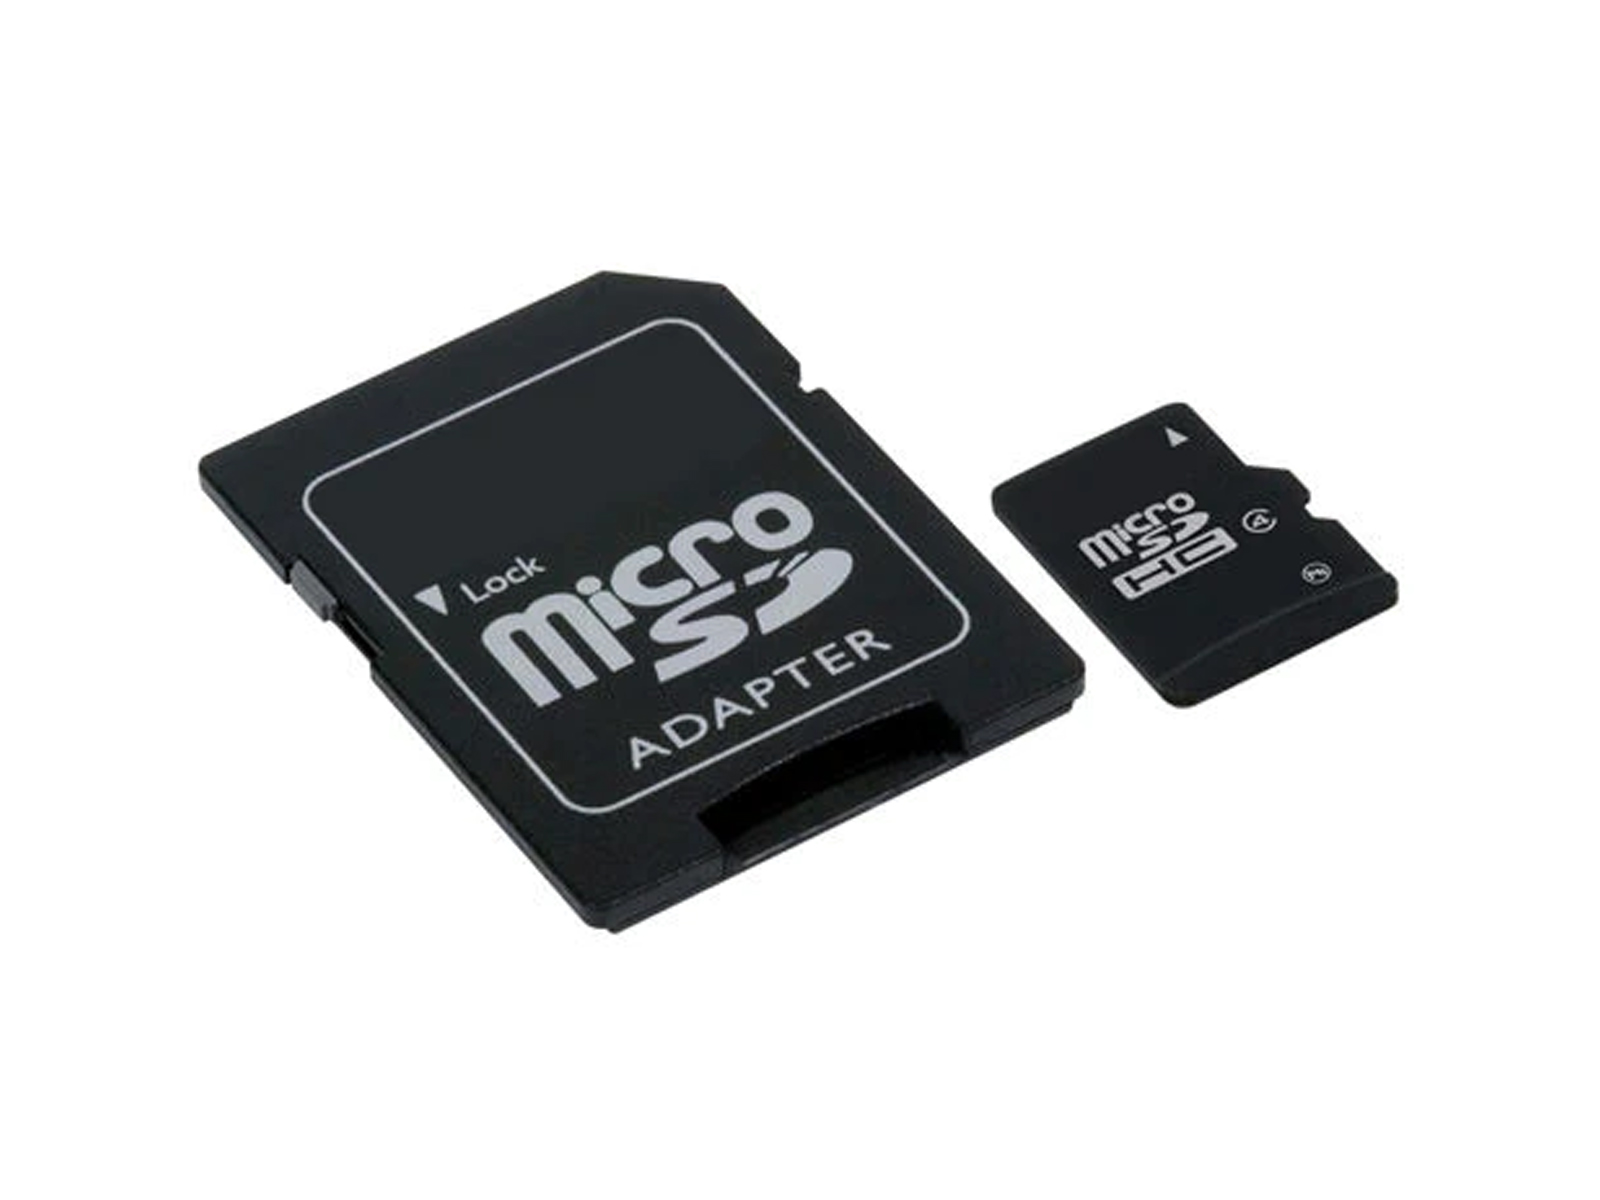 GVE-S-MMC-64 SD Micro SD Card and Adapter Angle View